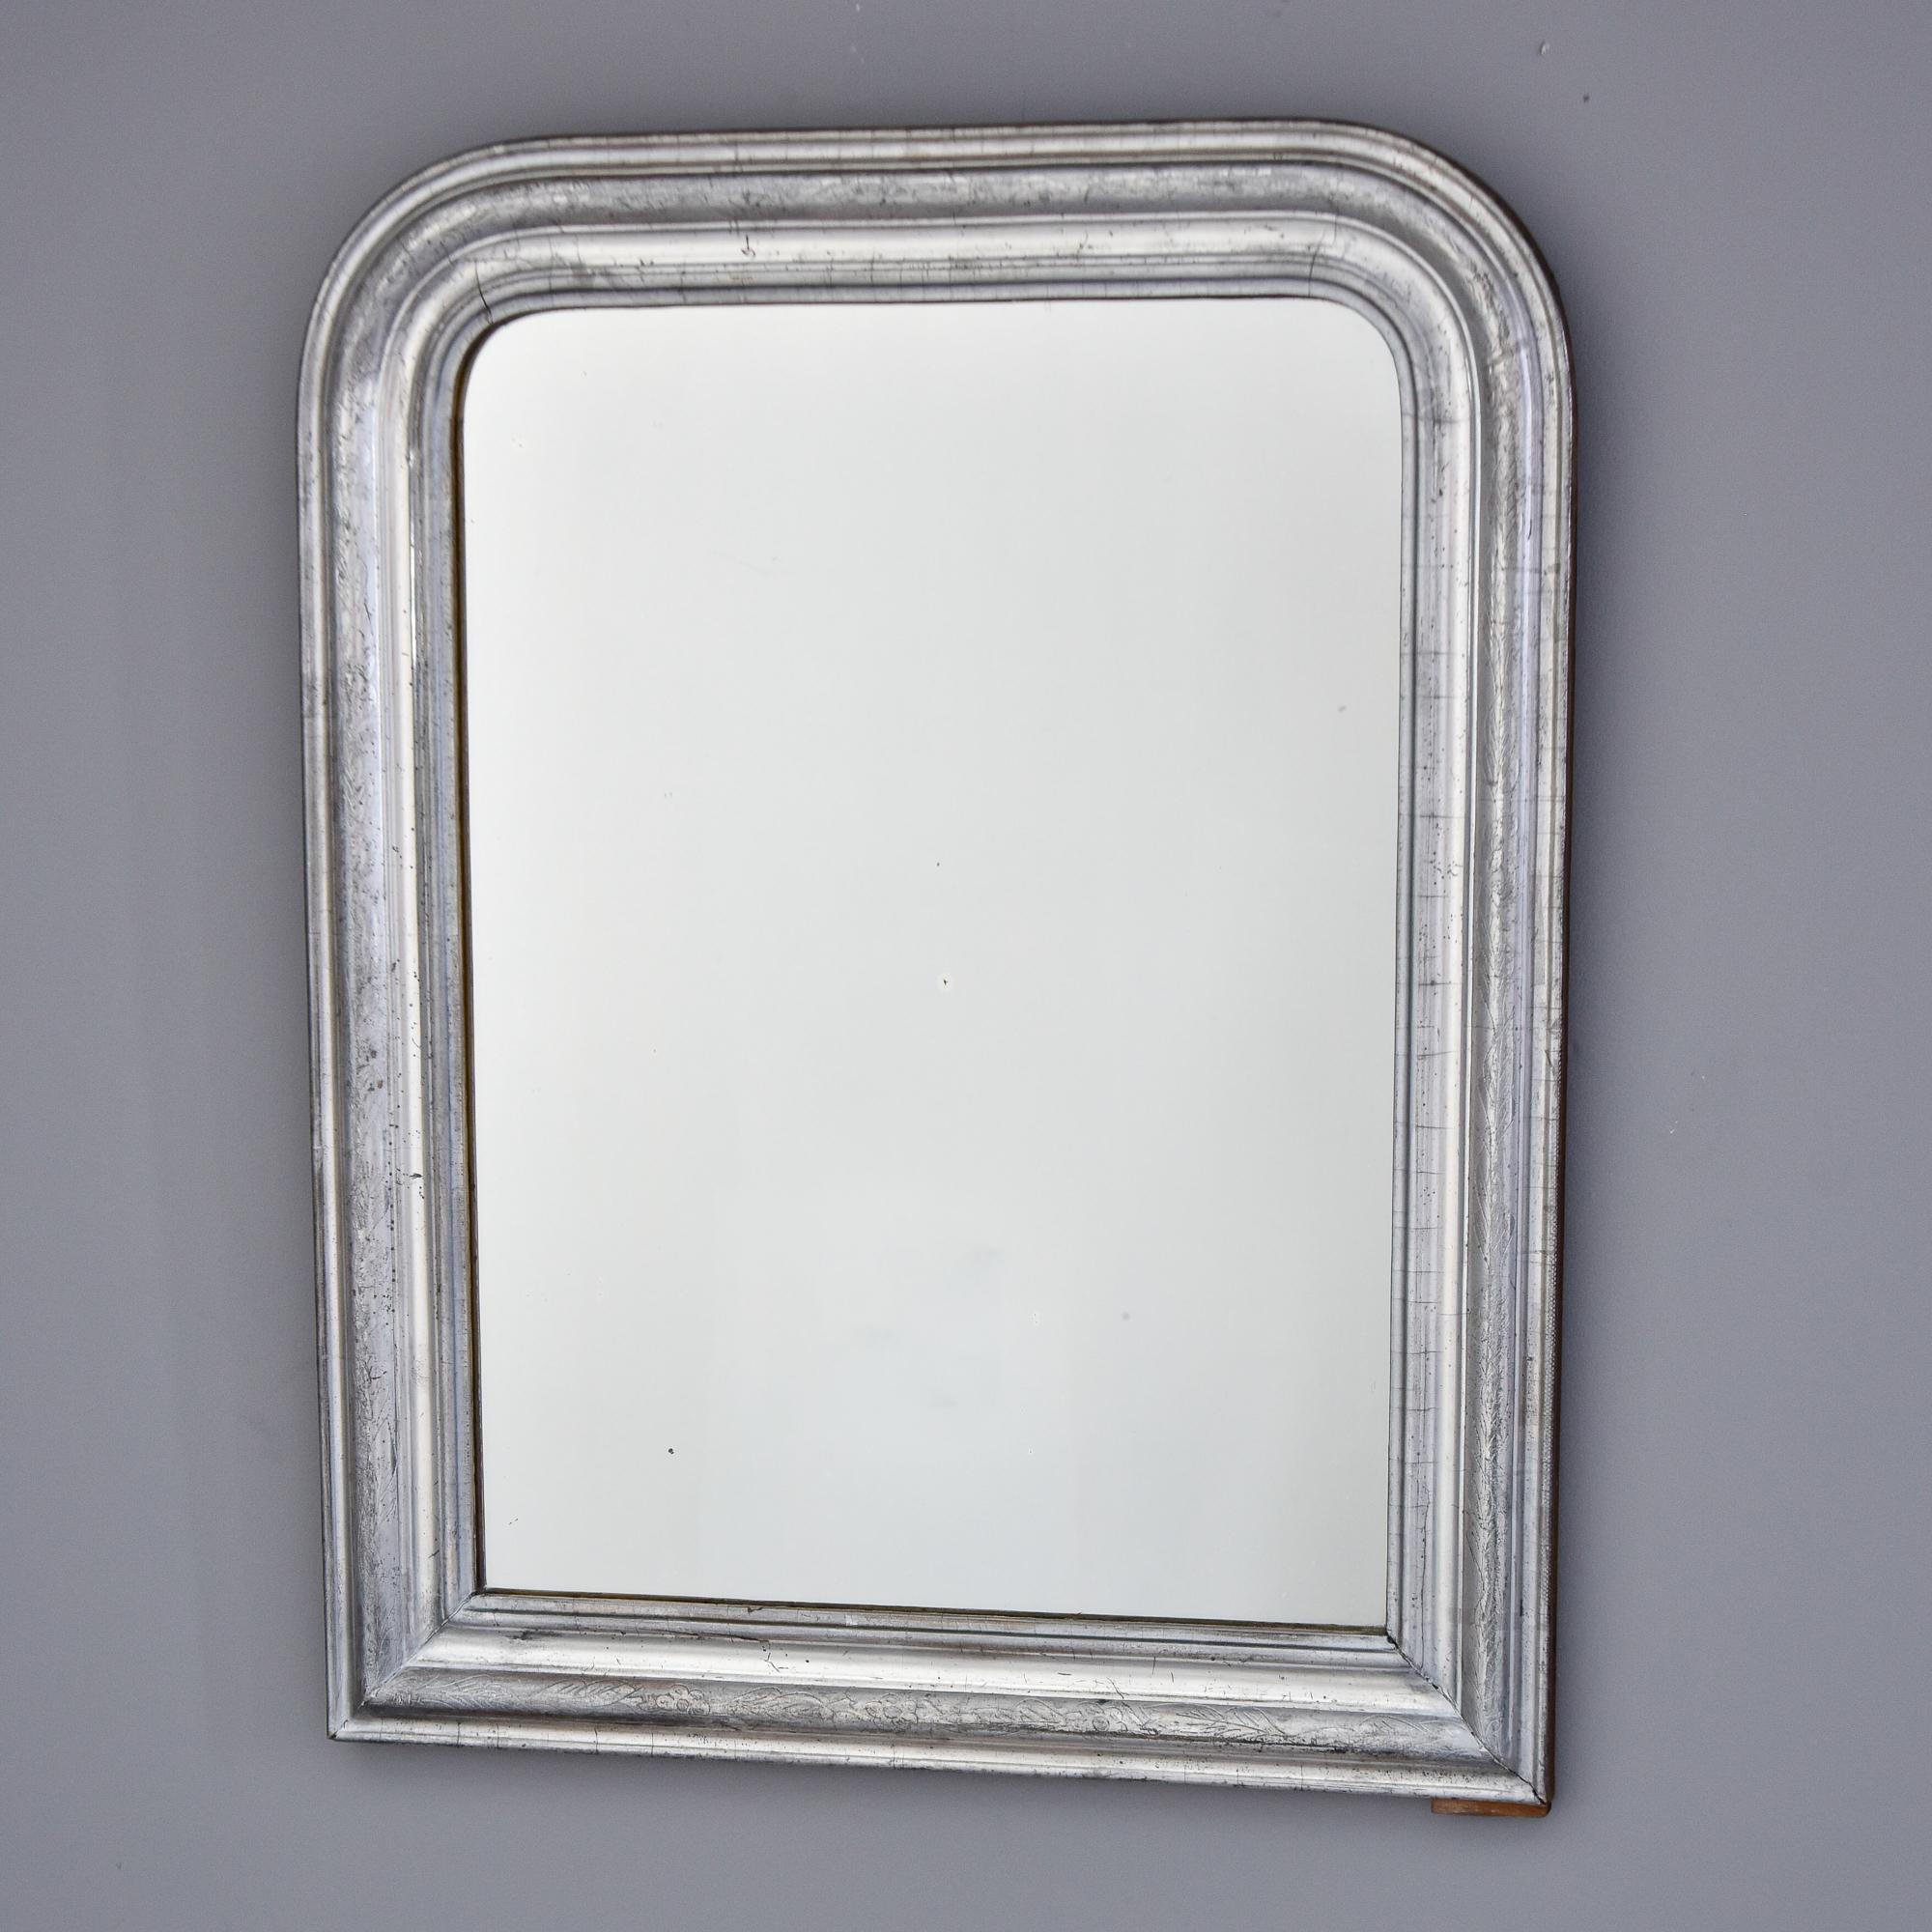 Found in France, this circa 1860s silver gilt Louis Philippe style wood frame has a subtle etched design of leaves and vines around the edge. Newer mirror. Unknown maker. 

Actual Mirror Size:  21.75” h x 16” w